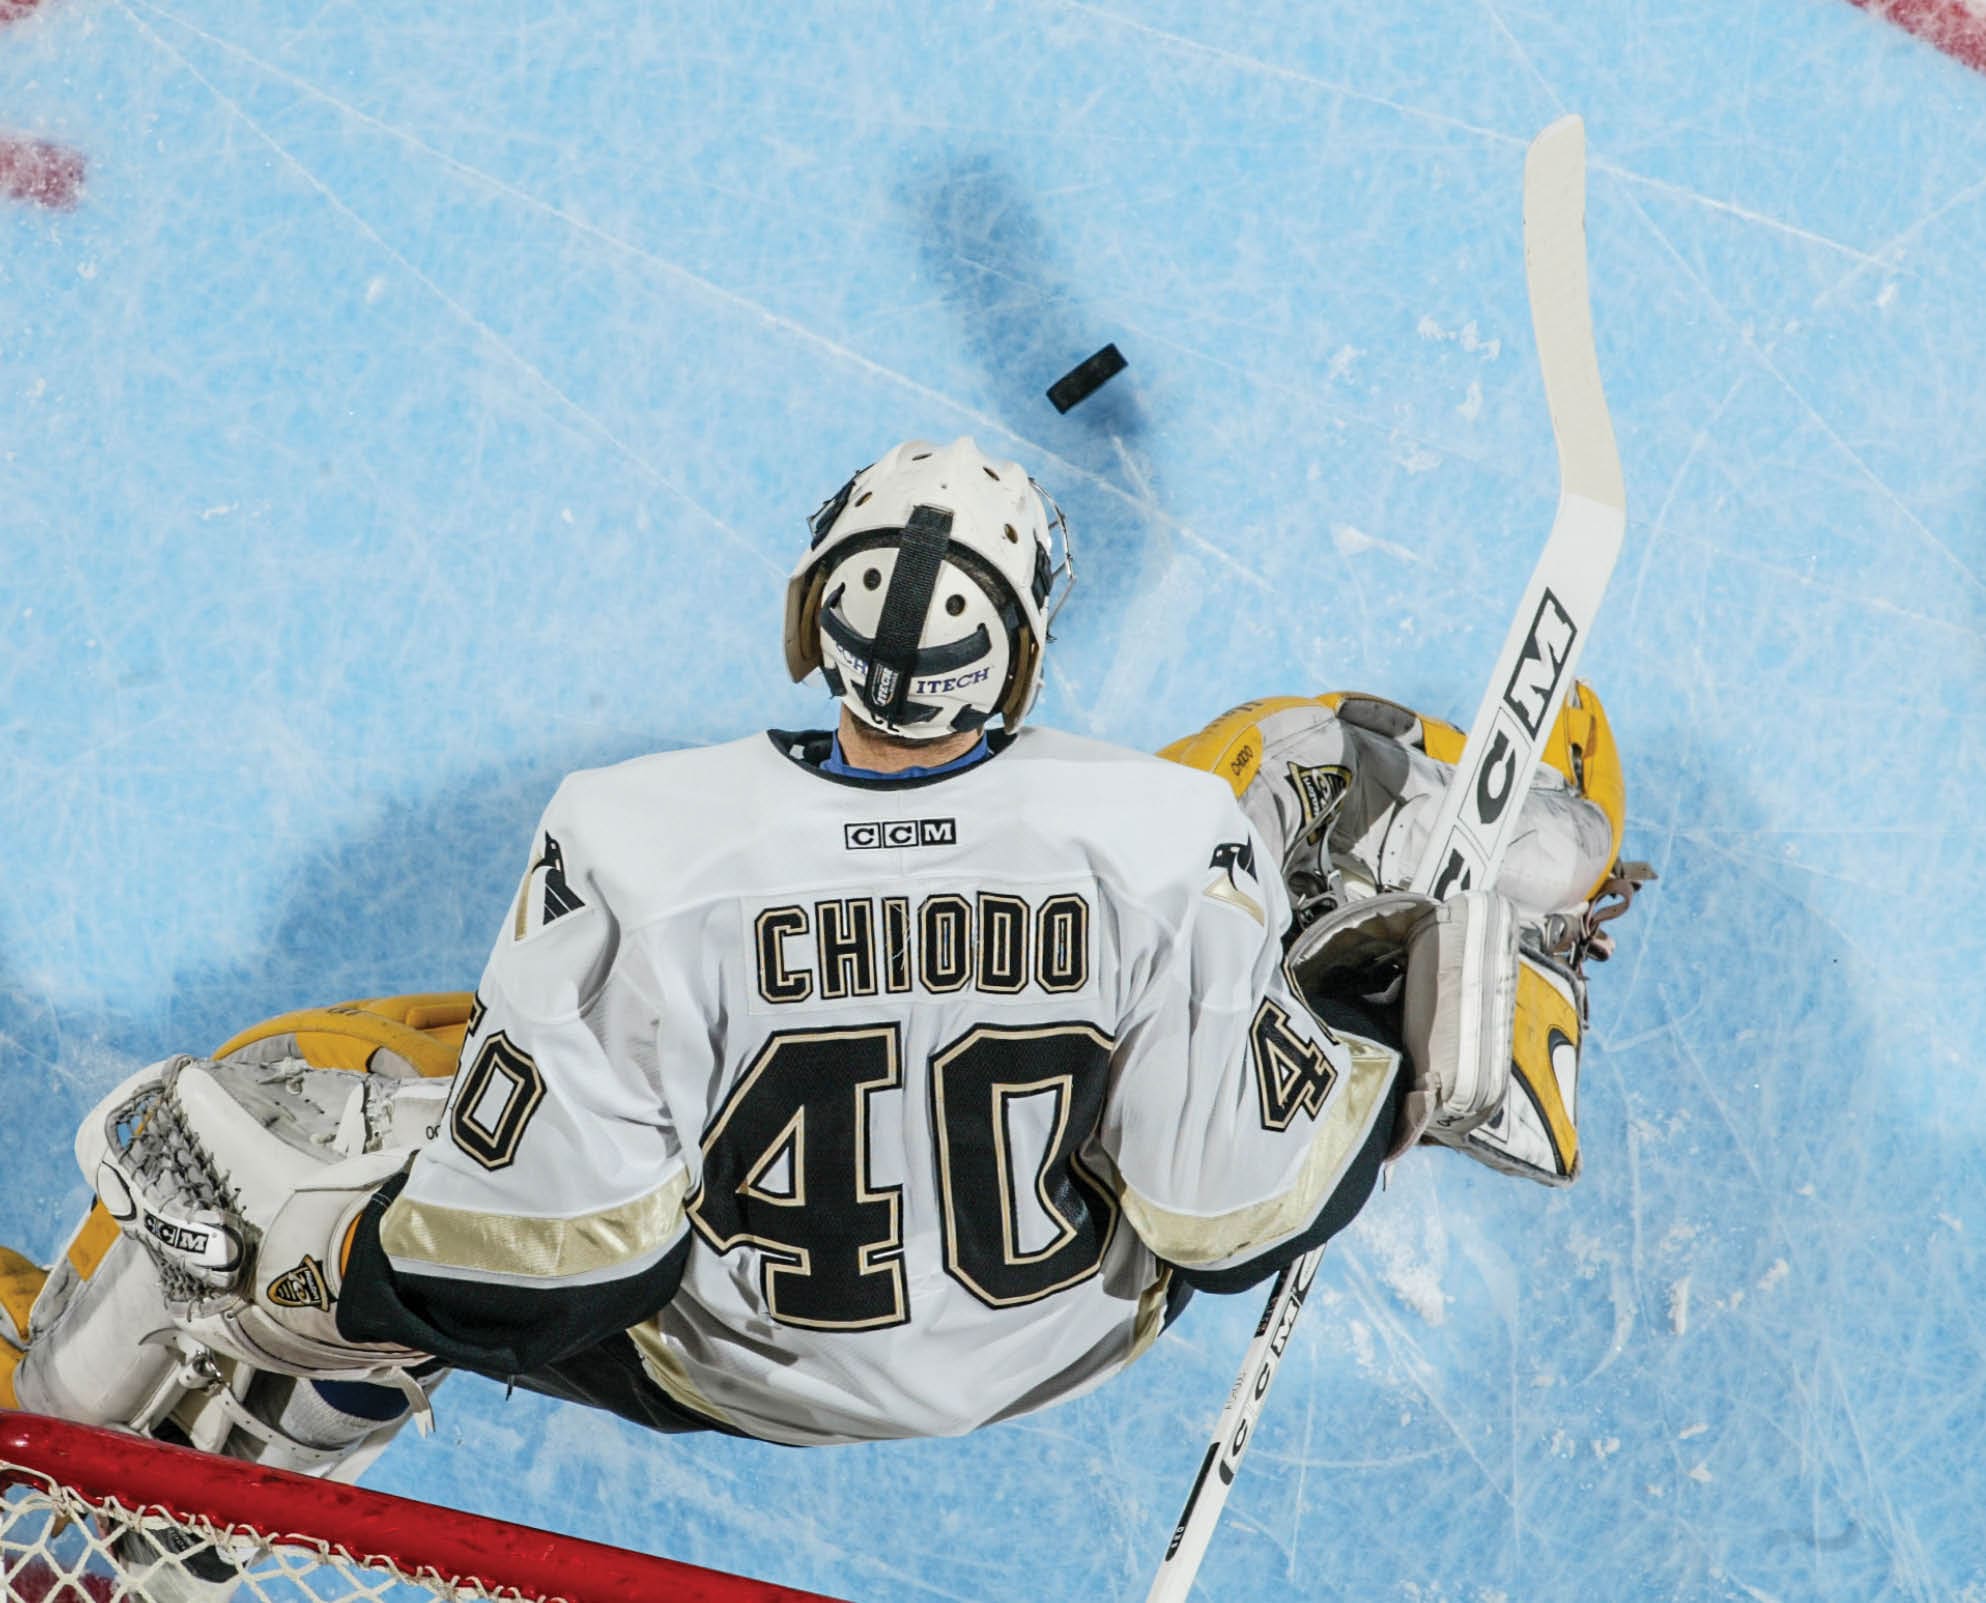 2004 Season:  Player Andy Chiodo of the Pittsburgh Penguins   (Photo by Bruce Bennett Studios via Getty Images Studios Getty Images)